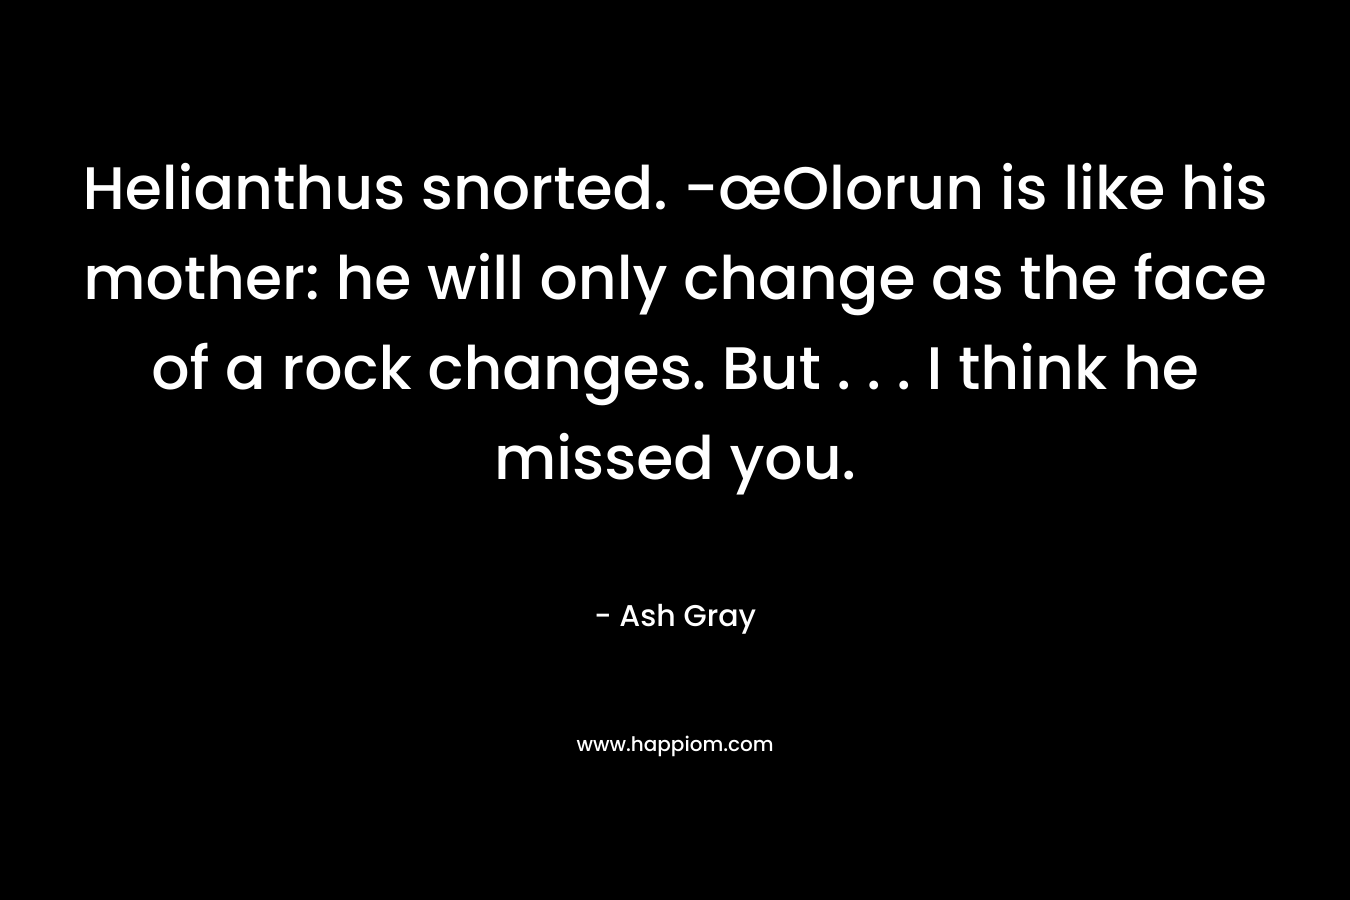 Helianthus snorted. -œOlorun is like his mother: he will only change as the face of a rock changes. But . . . I think he missed you.